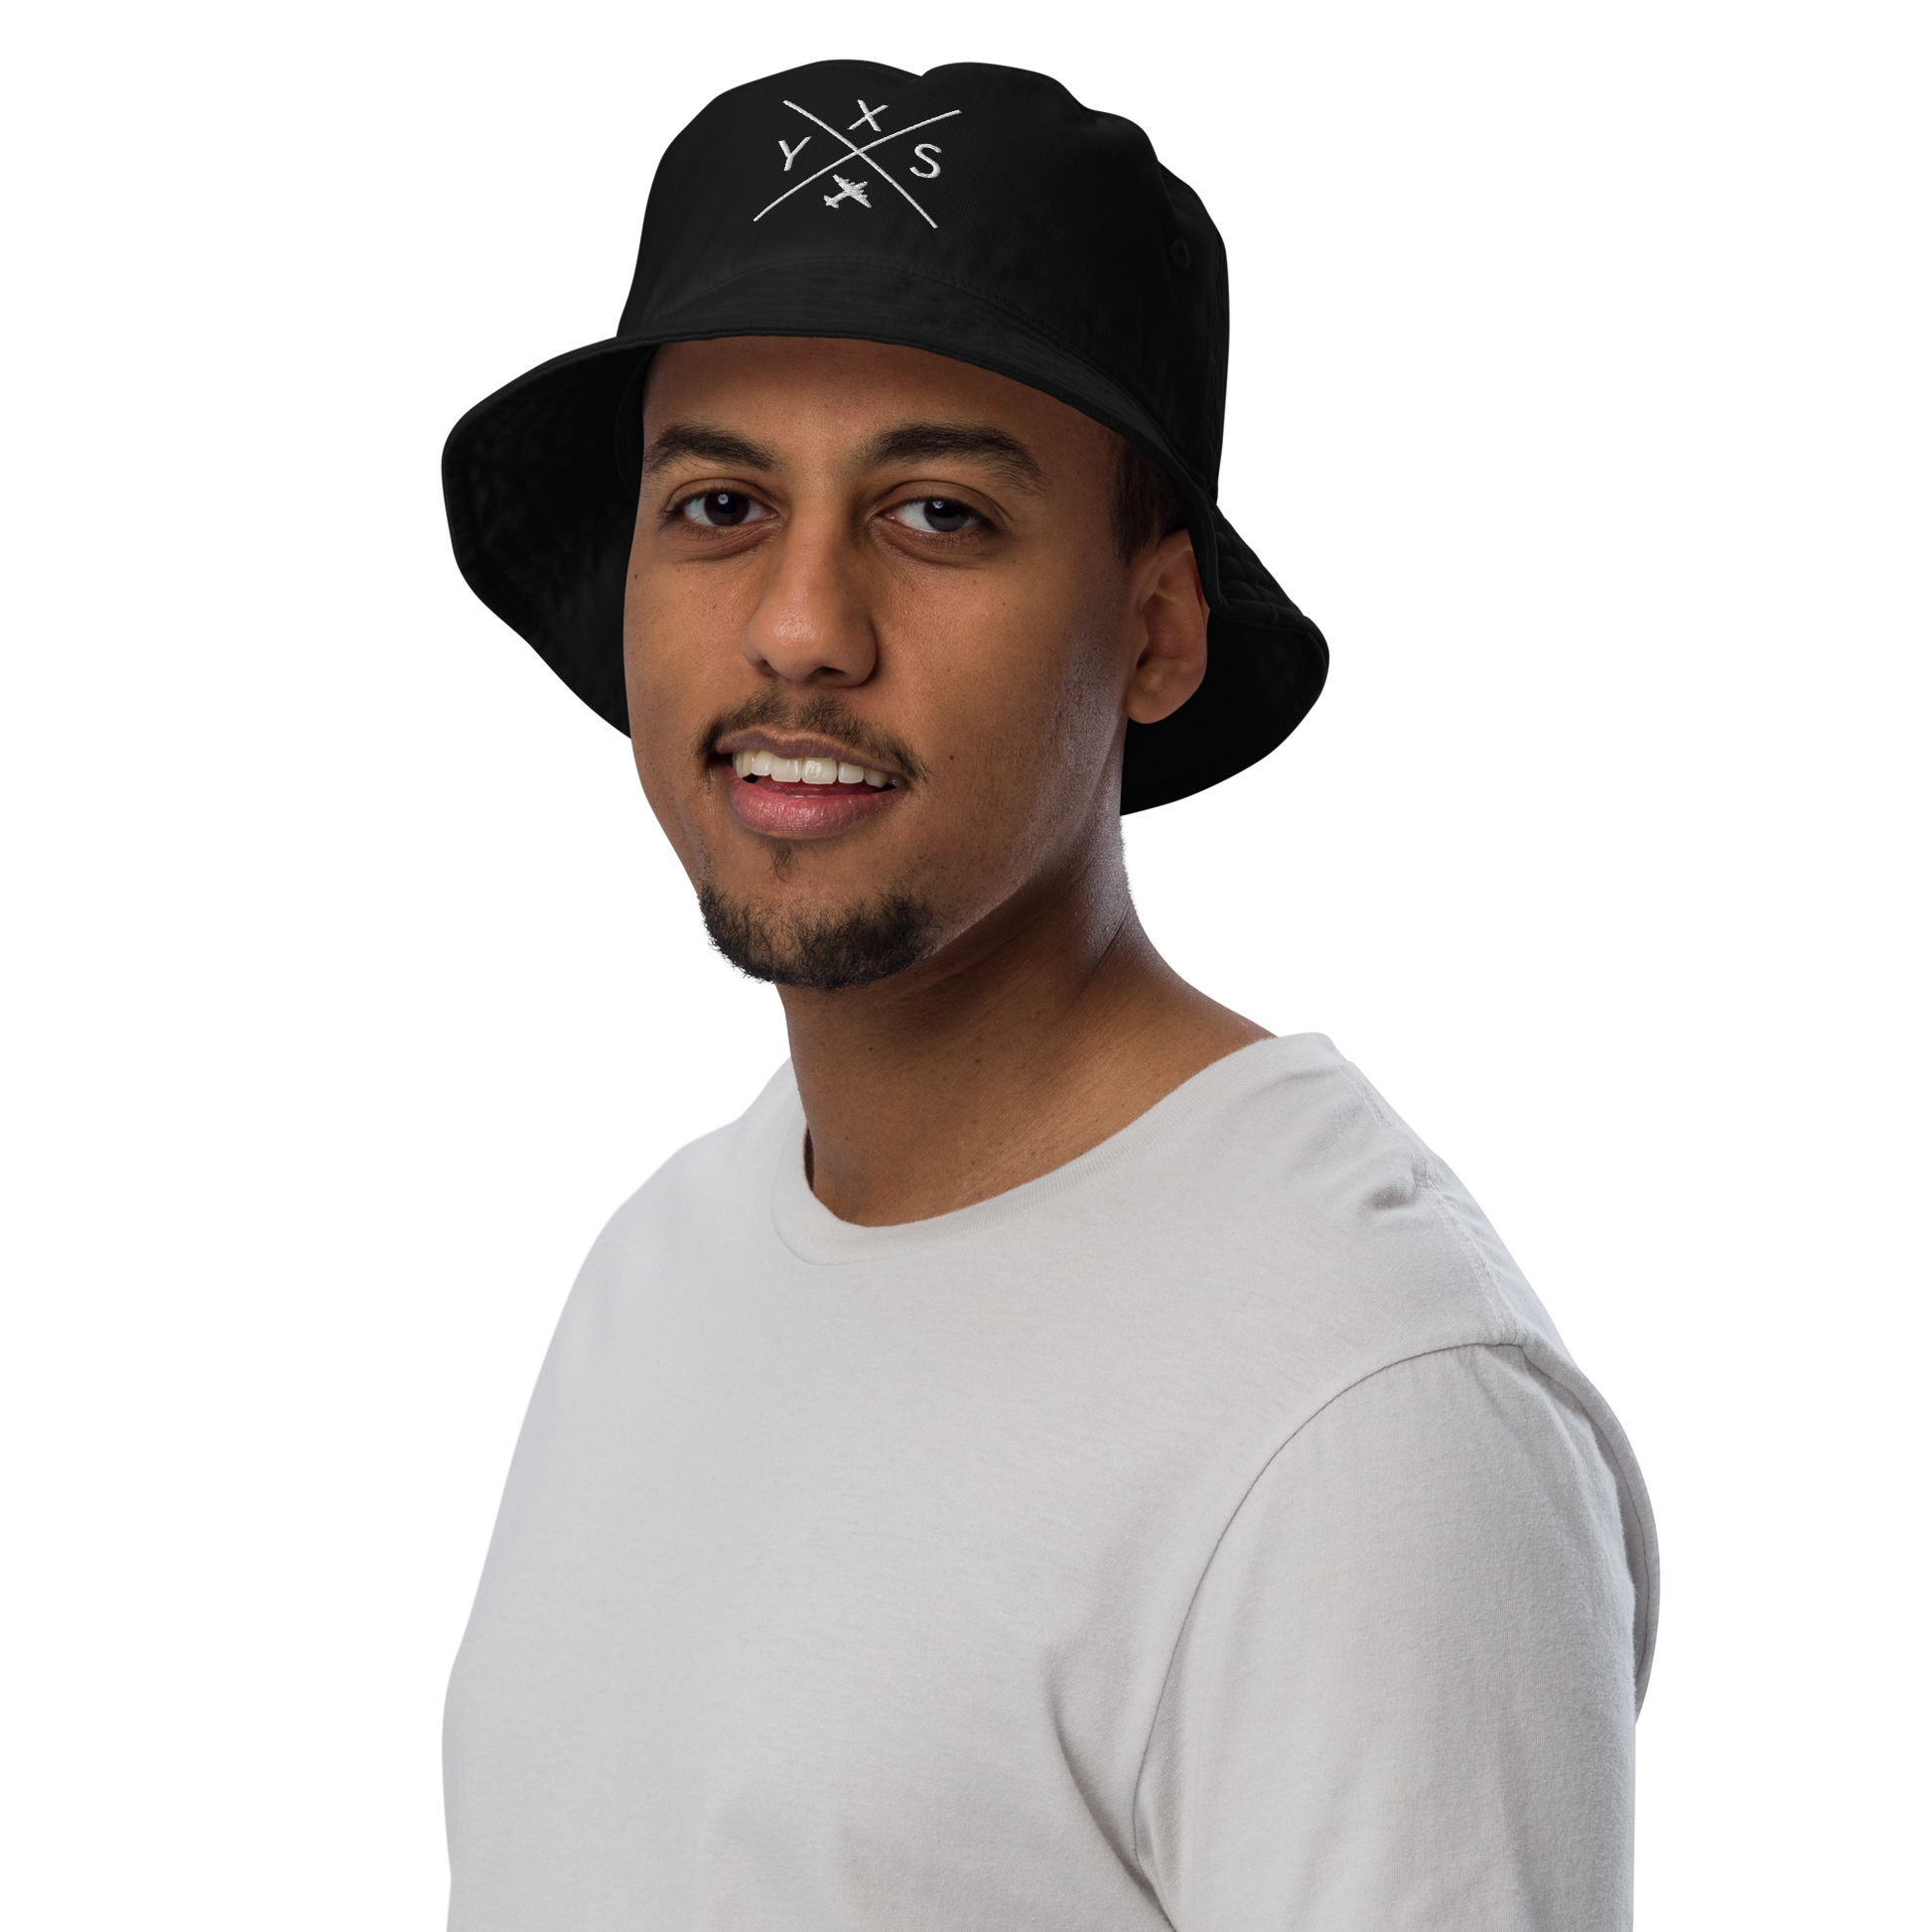 YHM Designs - YXU London Organic Cotton Bucket Hat - Crossed-X Design with Airport Code and Vintage Propliner - White Embroidery - Image 05